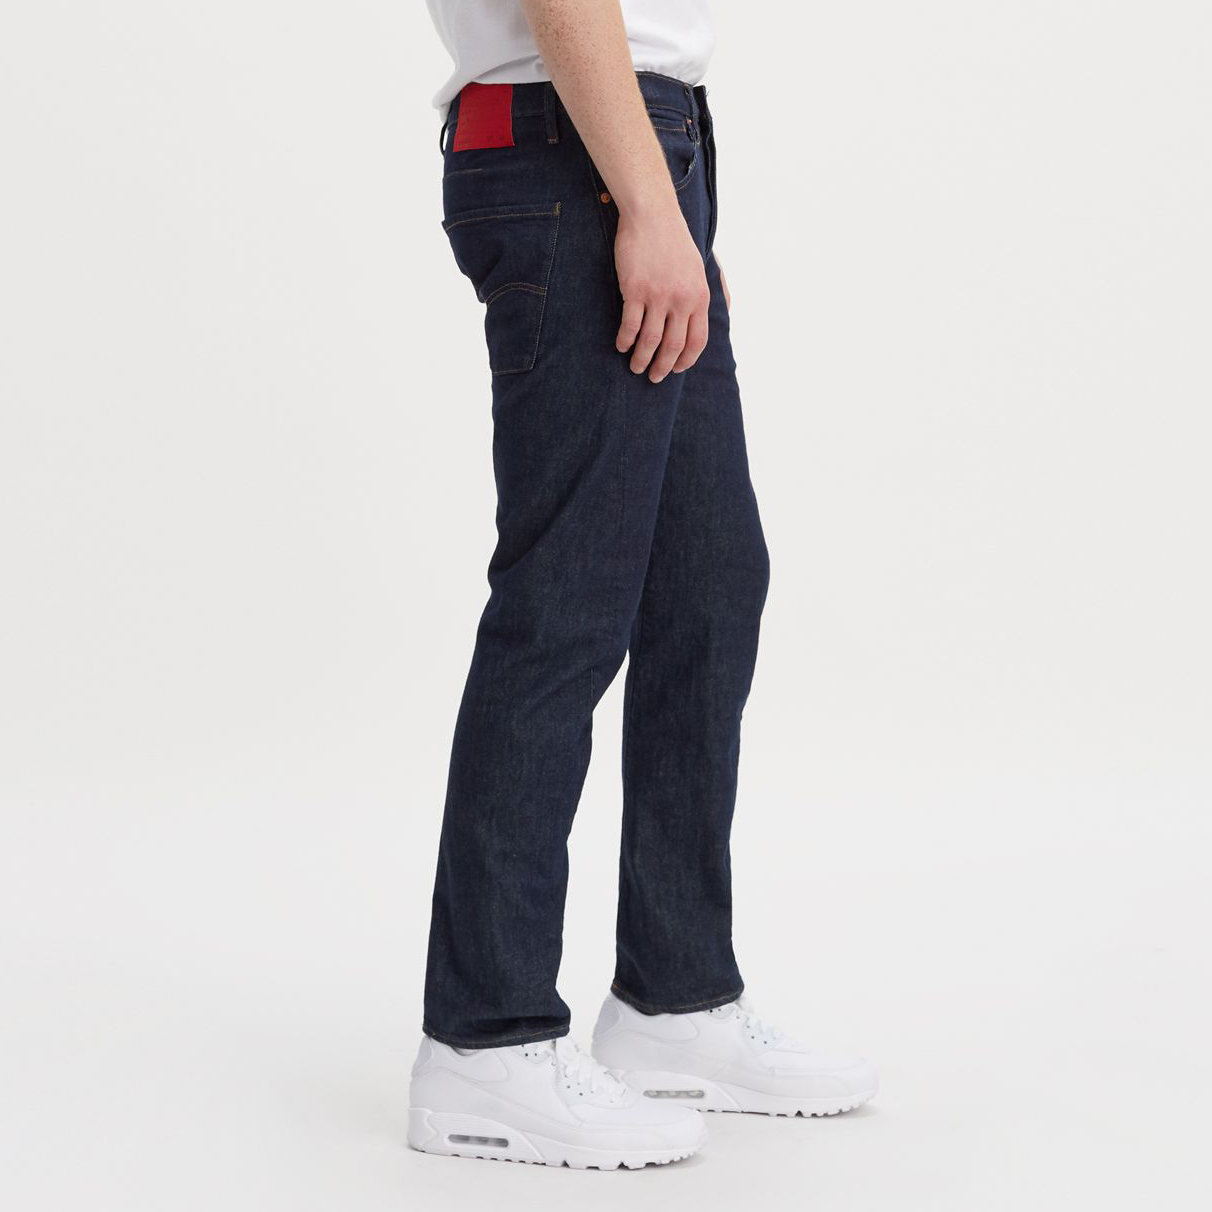 Levi's Engineered Jeans 502 Taper in 